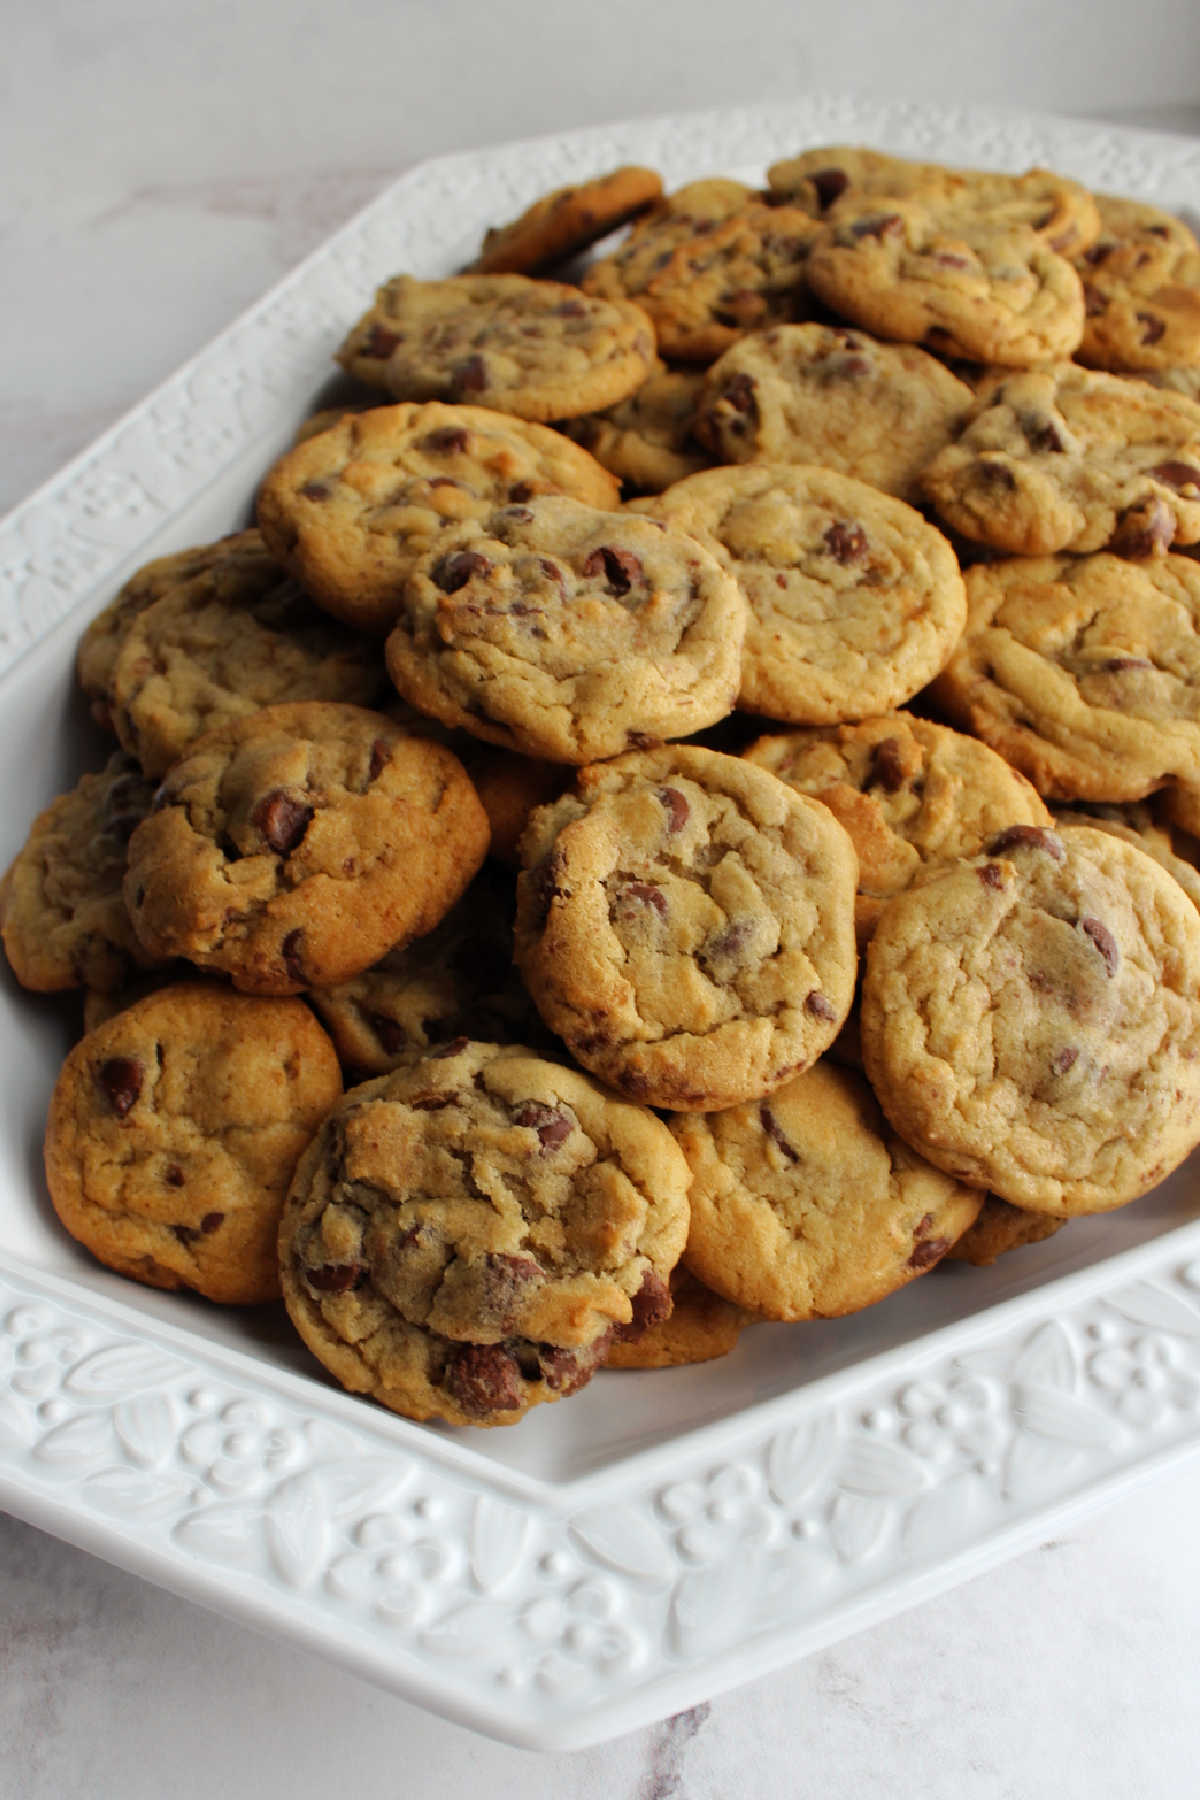 platter filled with chocolate chip cookies.